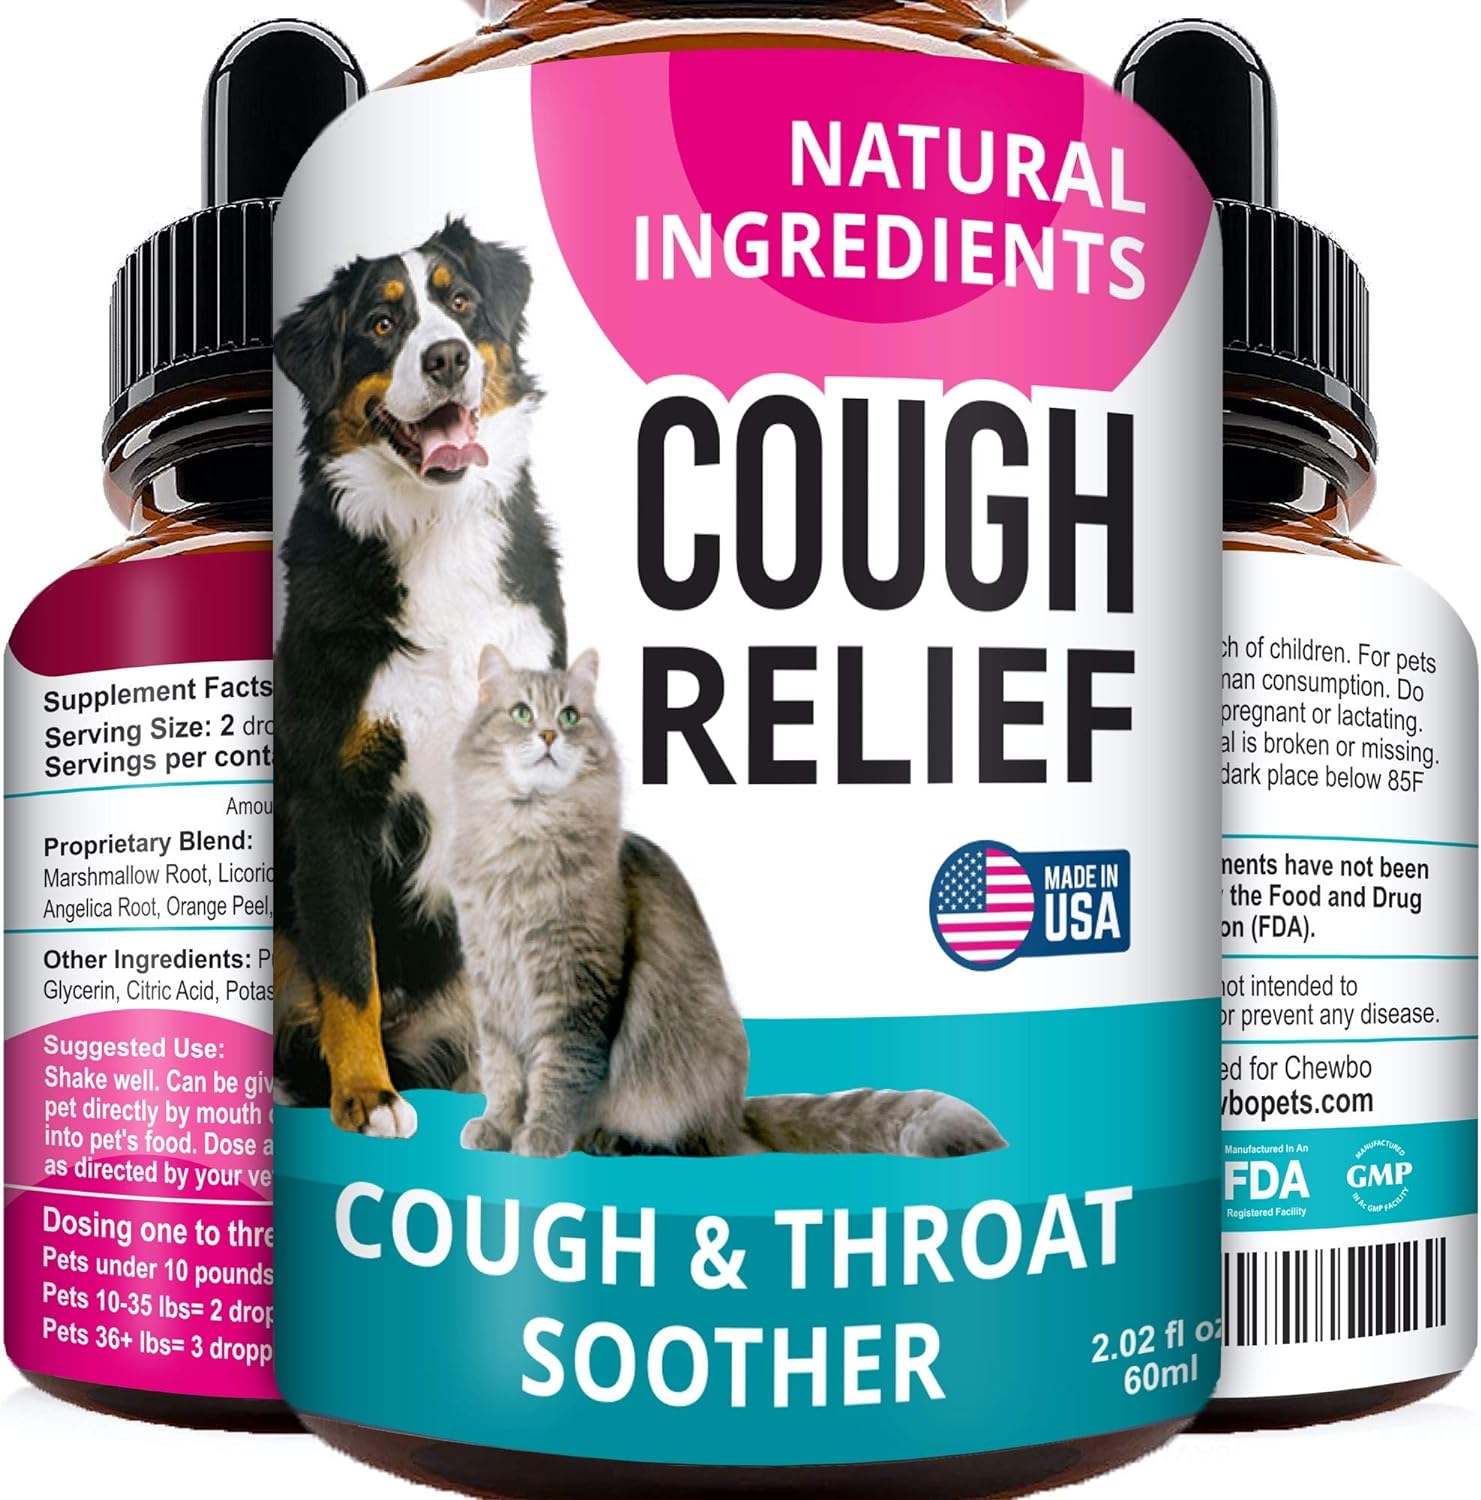 Kennel Cough Drops